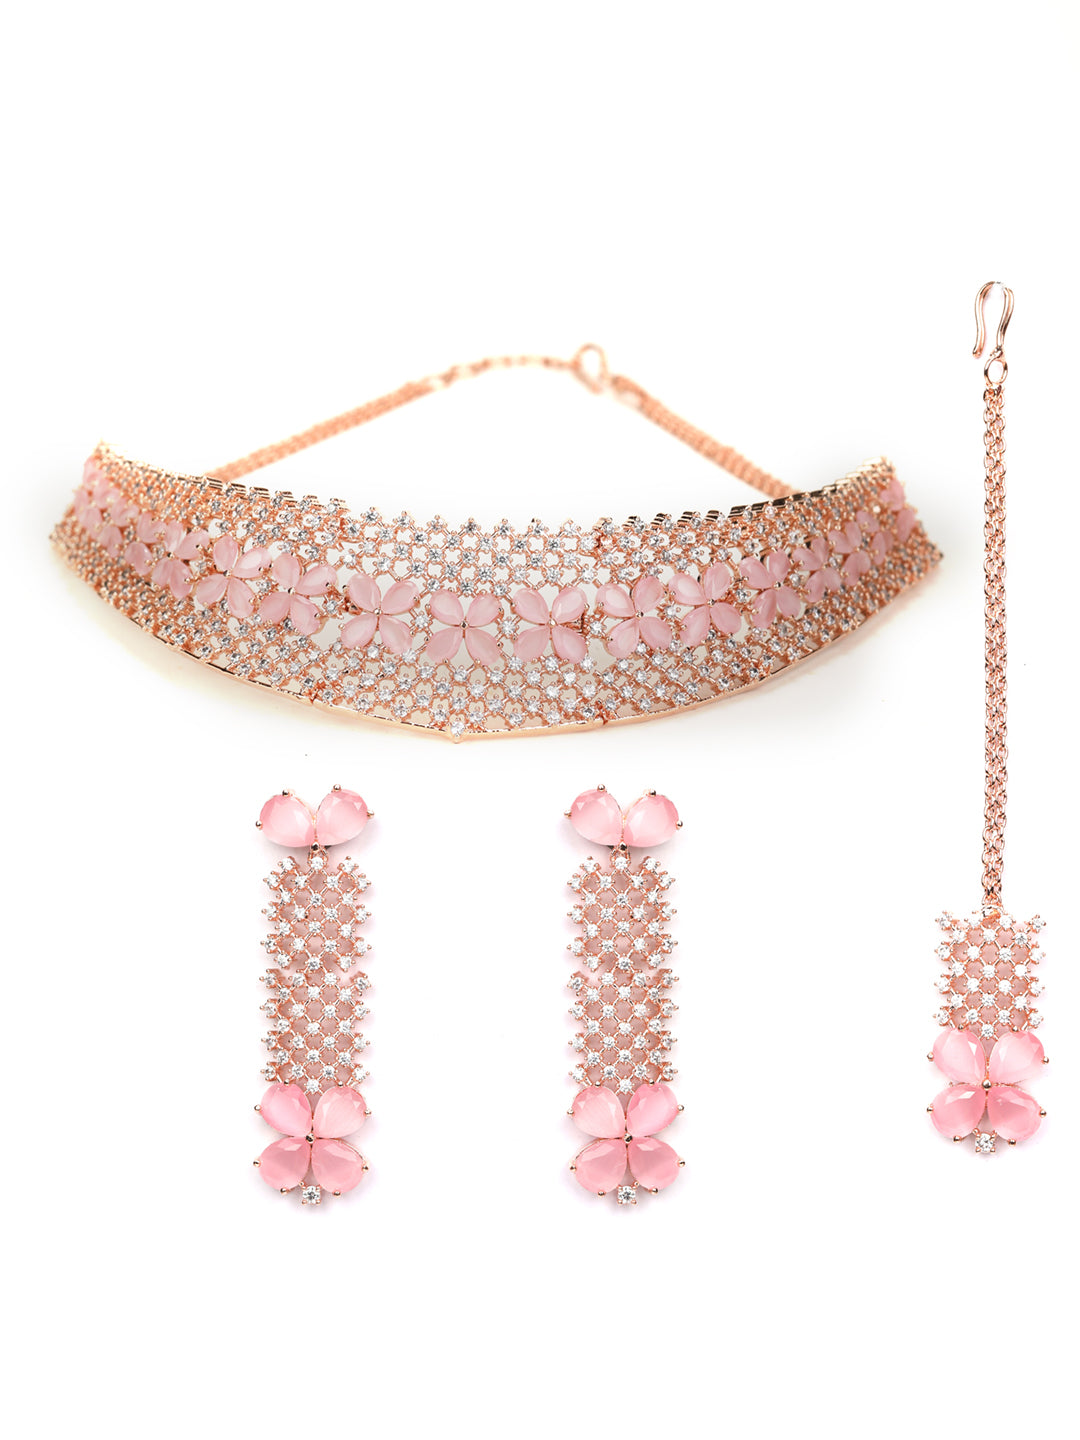 Pink Color Of American Diamond Necklace